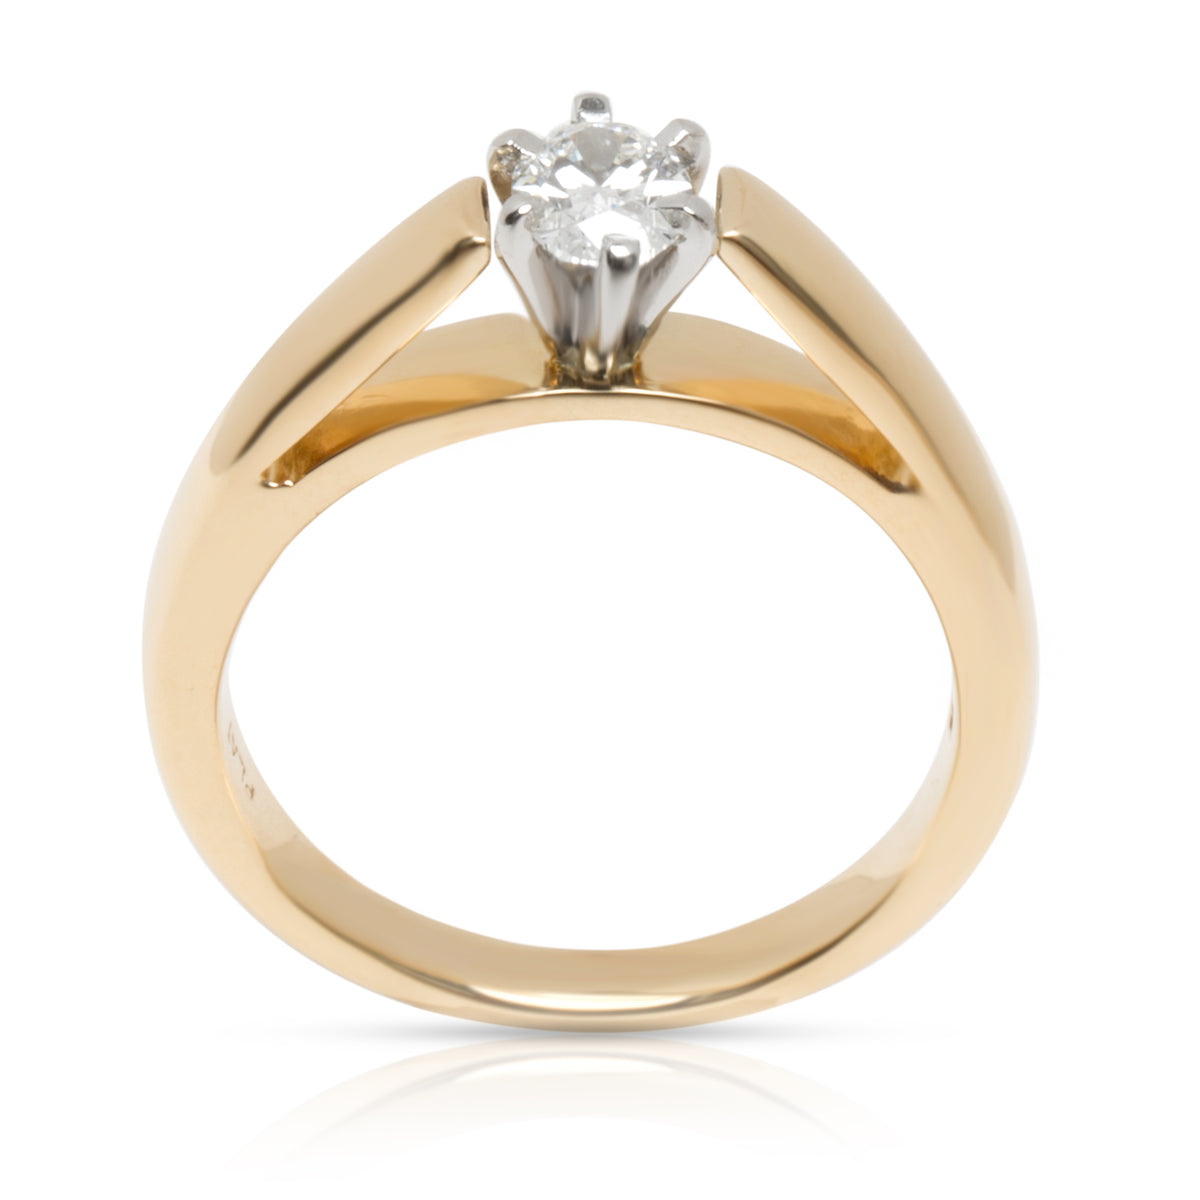 Blue Nile Diamond Solitaire Engagement Ring in 18K Yellow Gold (0.31 CTW F/VS1)